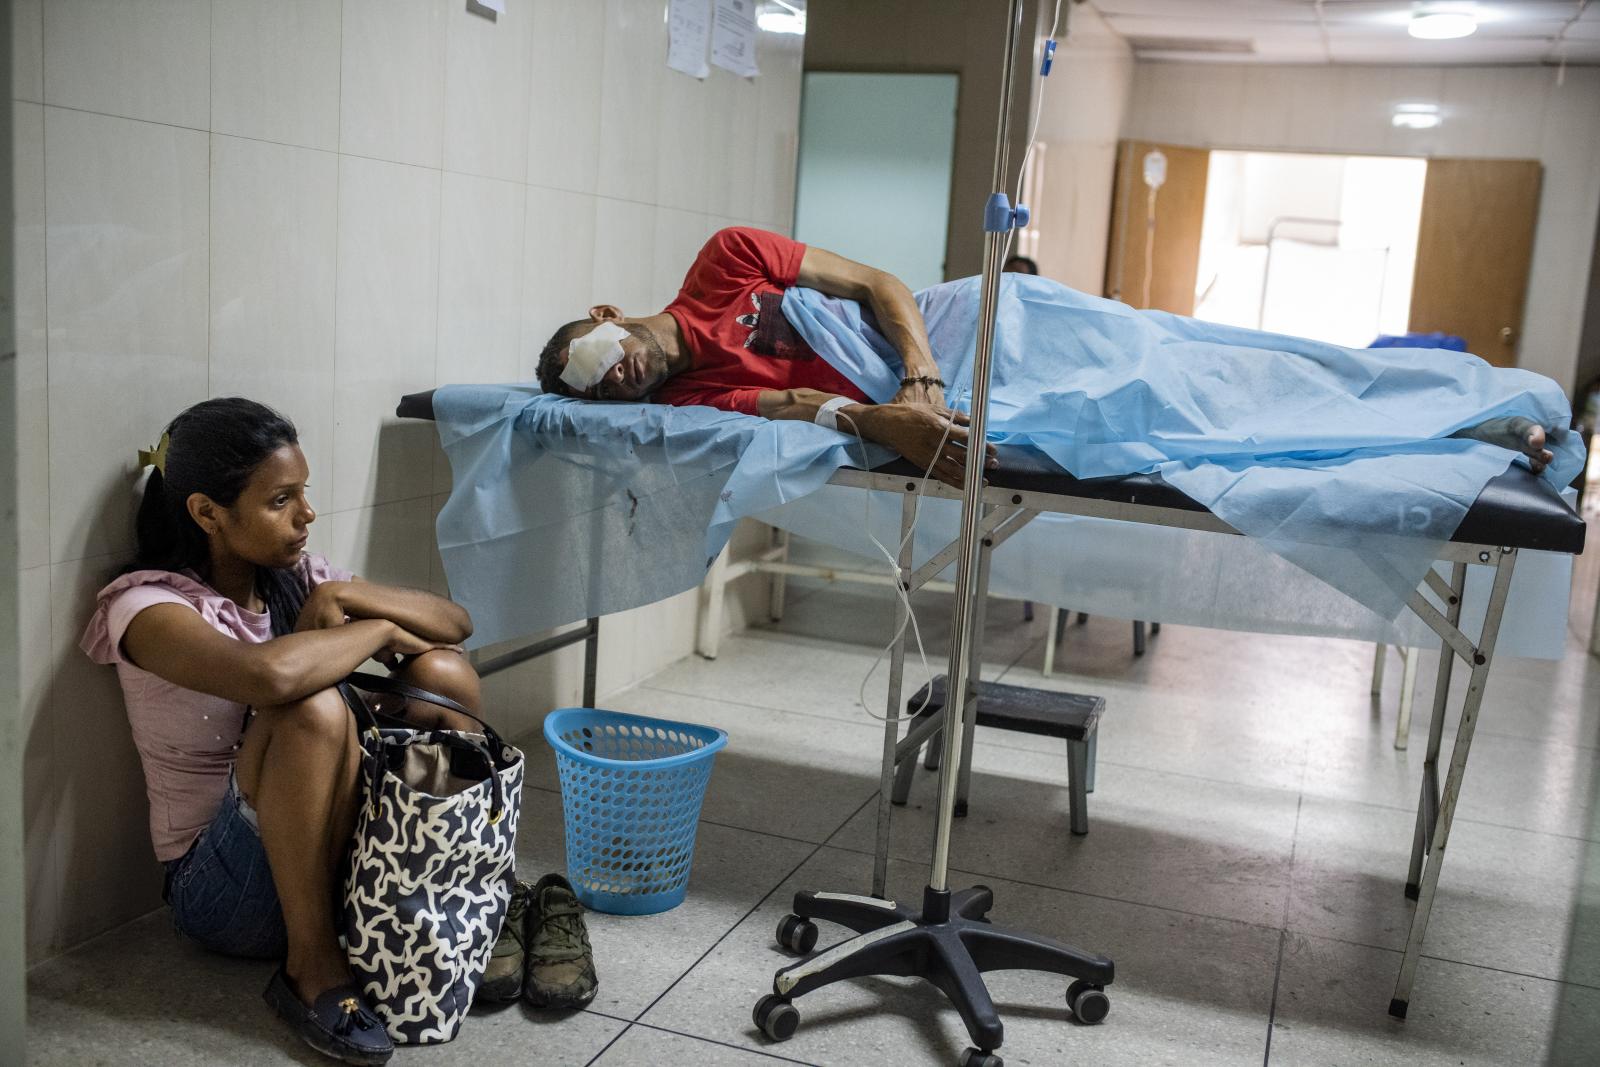 Venezuela / Between violence and justice - An anti-government protester is injured in the hospital...